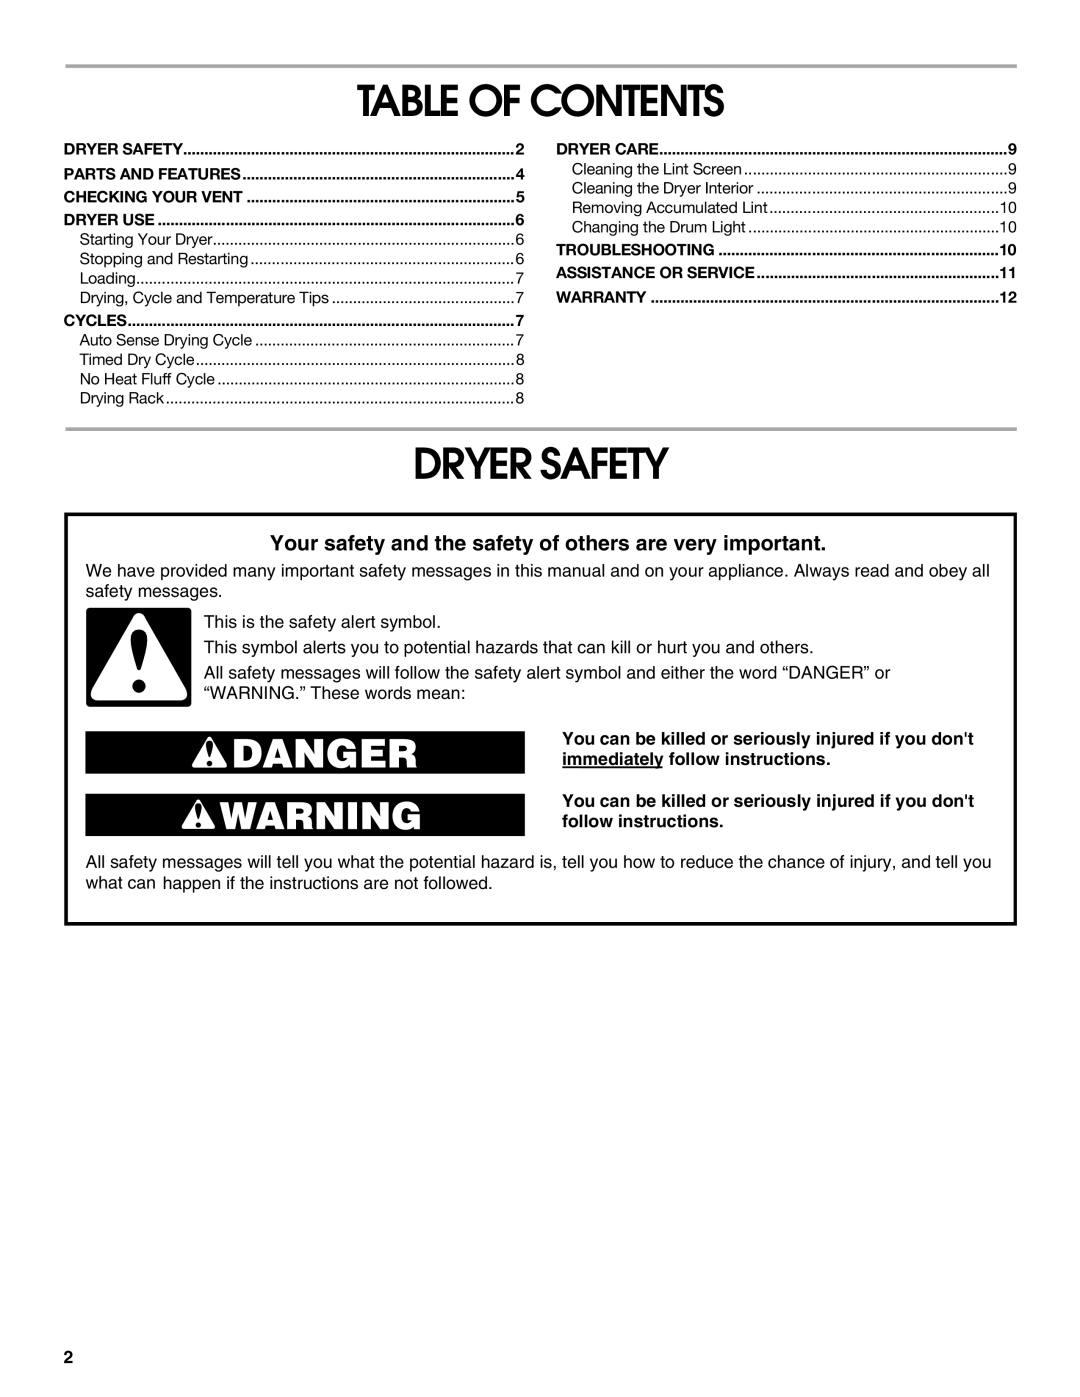 Estate 8318478A manual Table Of Contents, Dryer Safety 